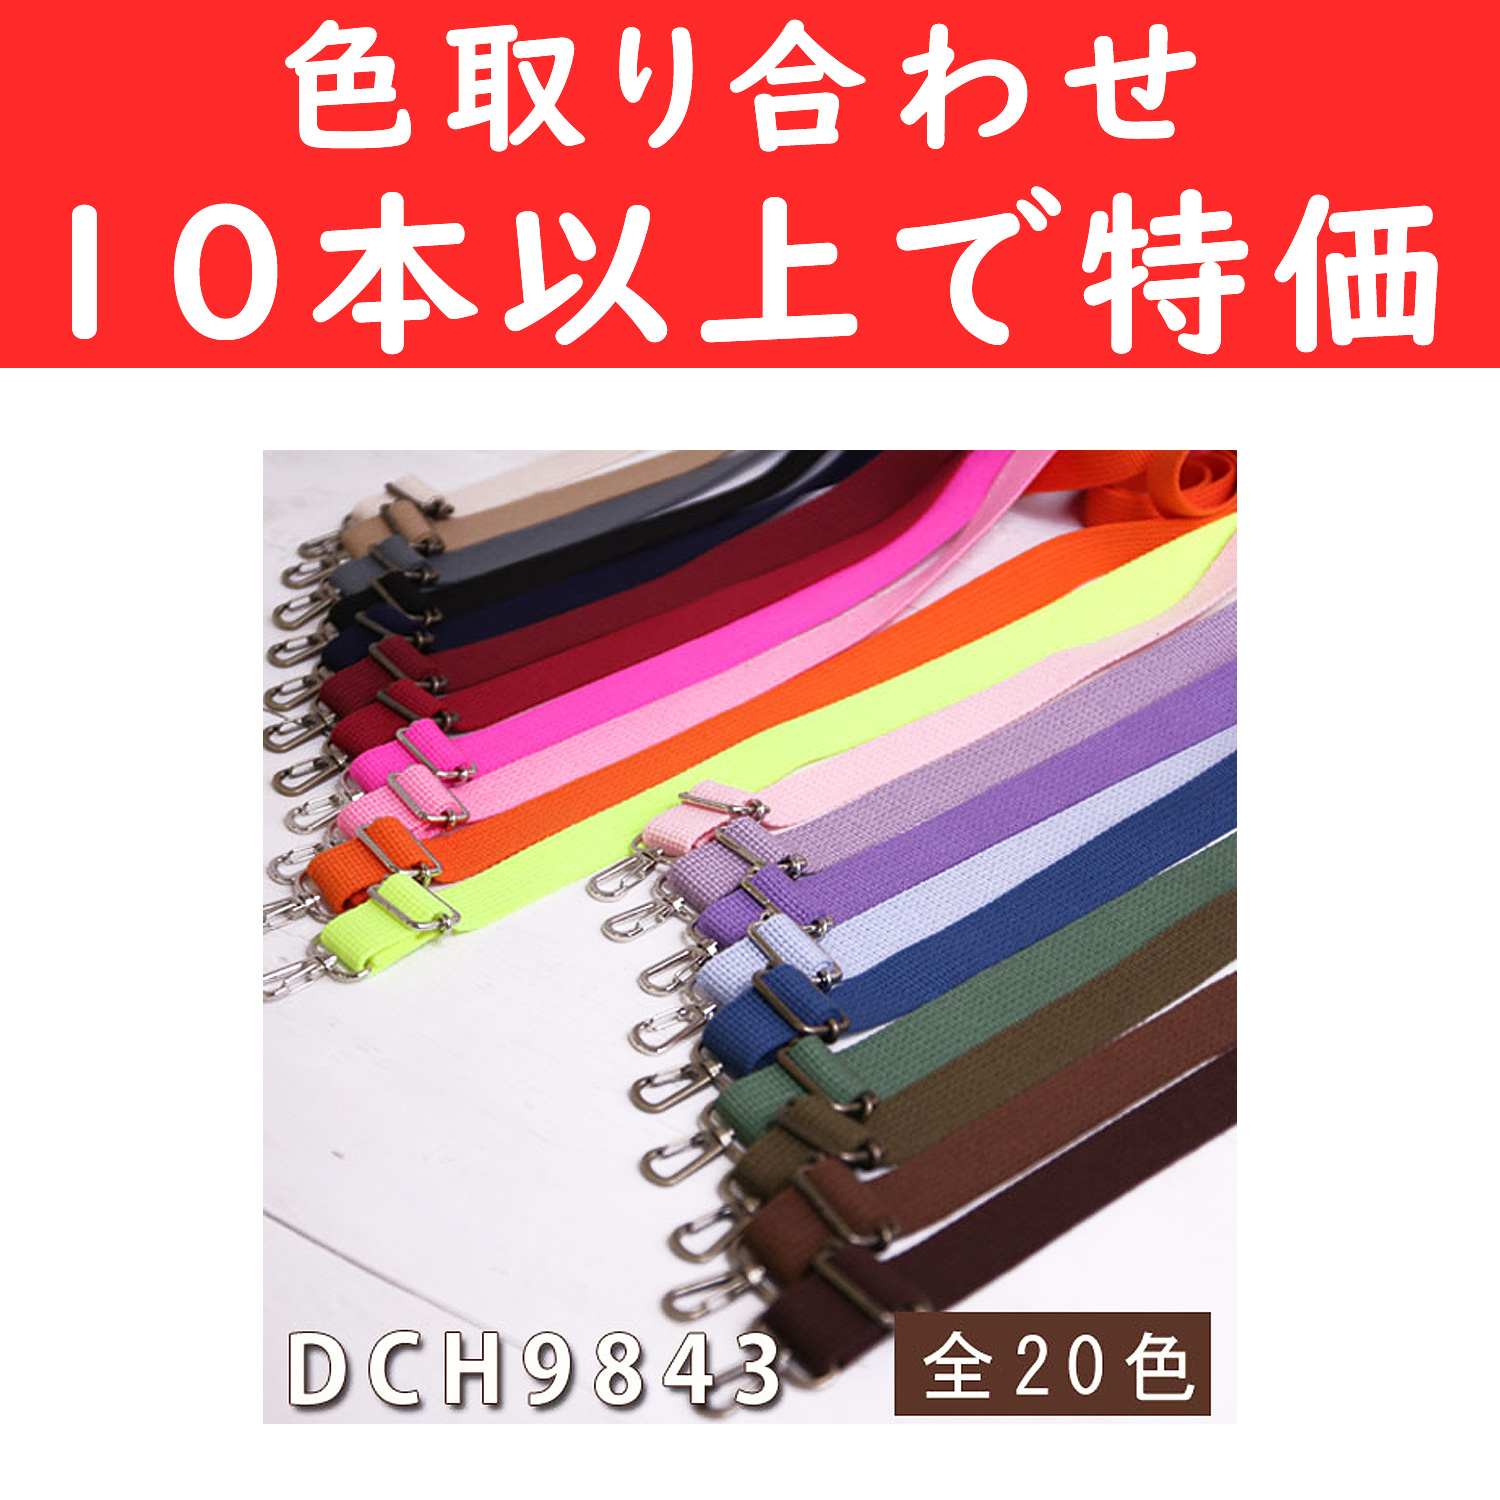 DCH9843-OVER10 Acrylic Shoulder Bag Handle width approx. 2.5cm x 70~140cm Bulk Order with over 10 Units Only (pcs)